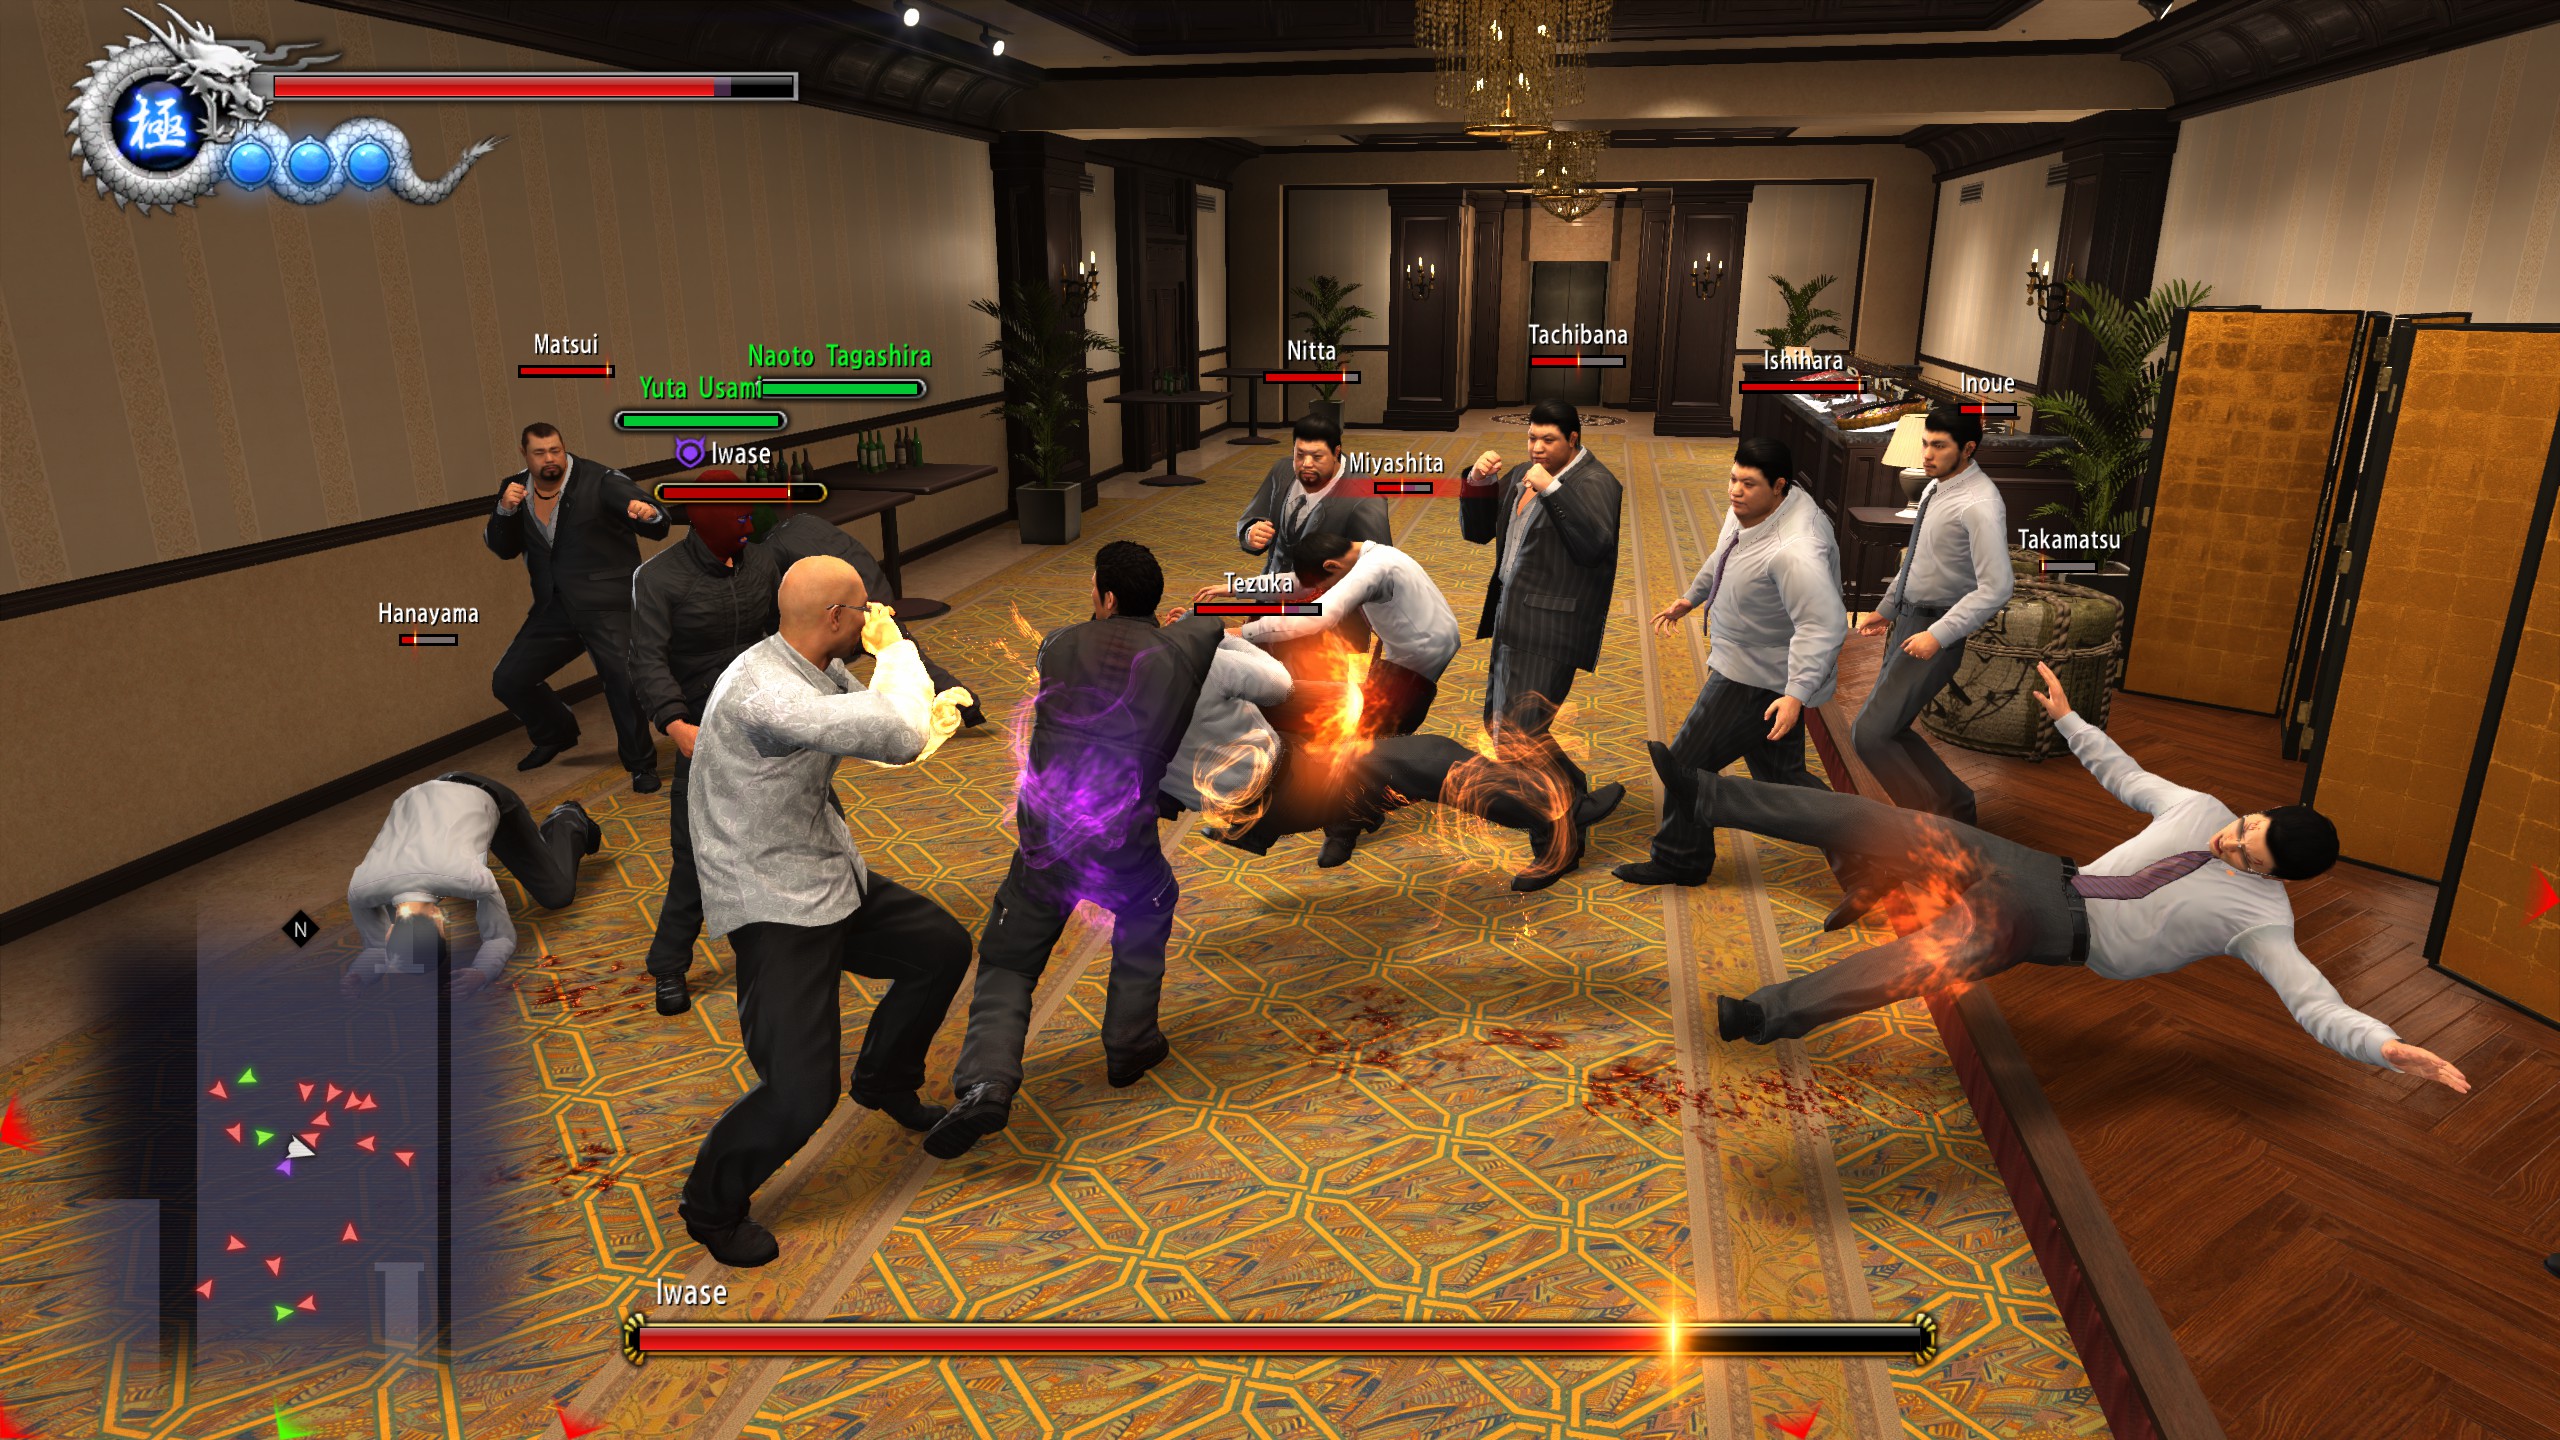 Kiryu and allies fighting a large corridor full of foes.